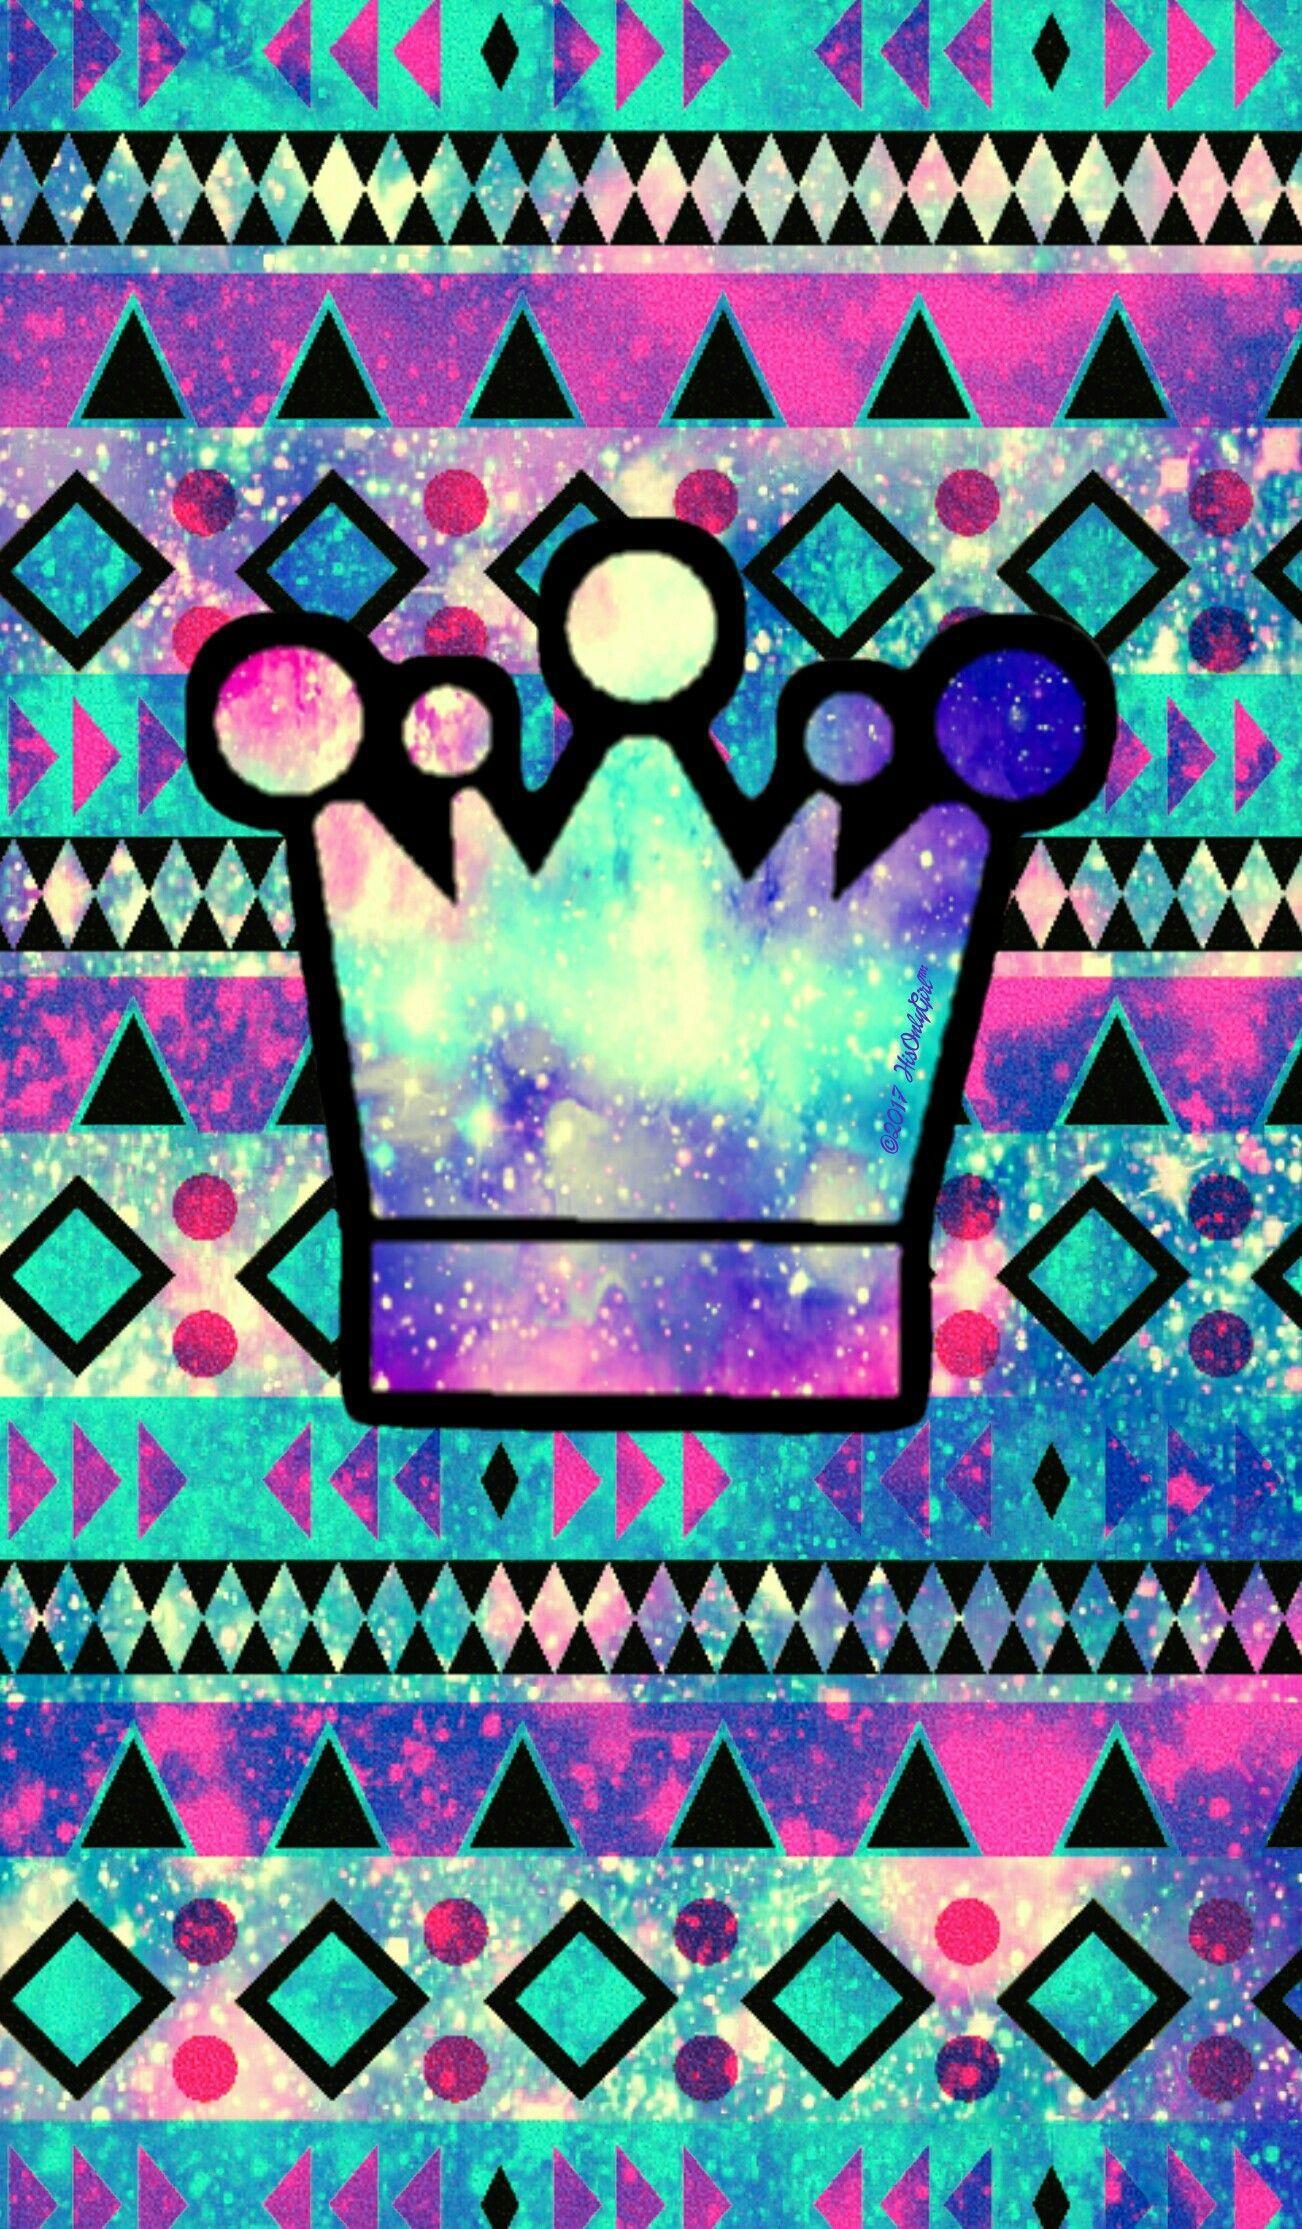 Tribal Crown Galaxy IPhone Android Wallpaper I Created For The App